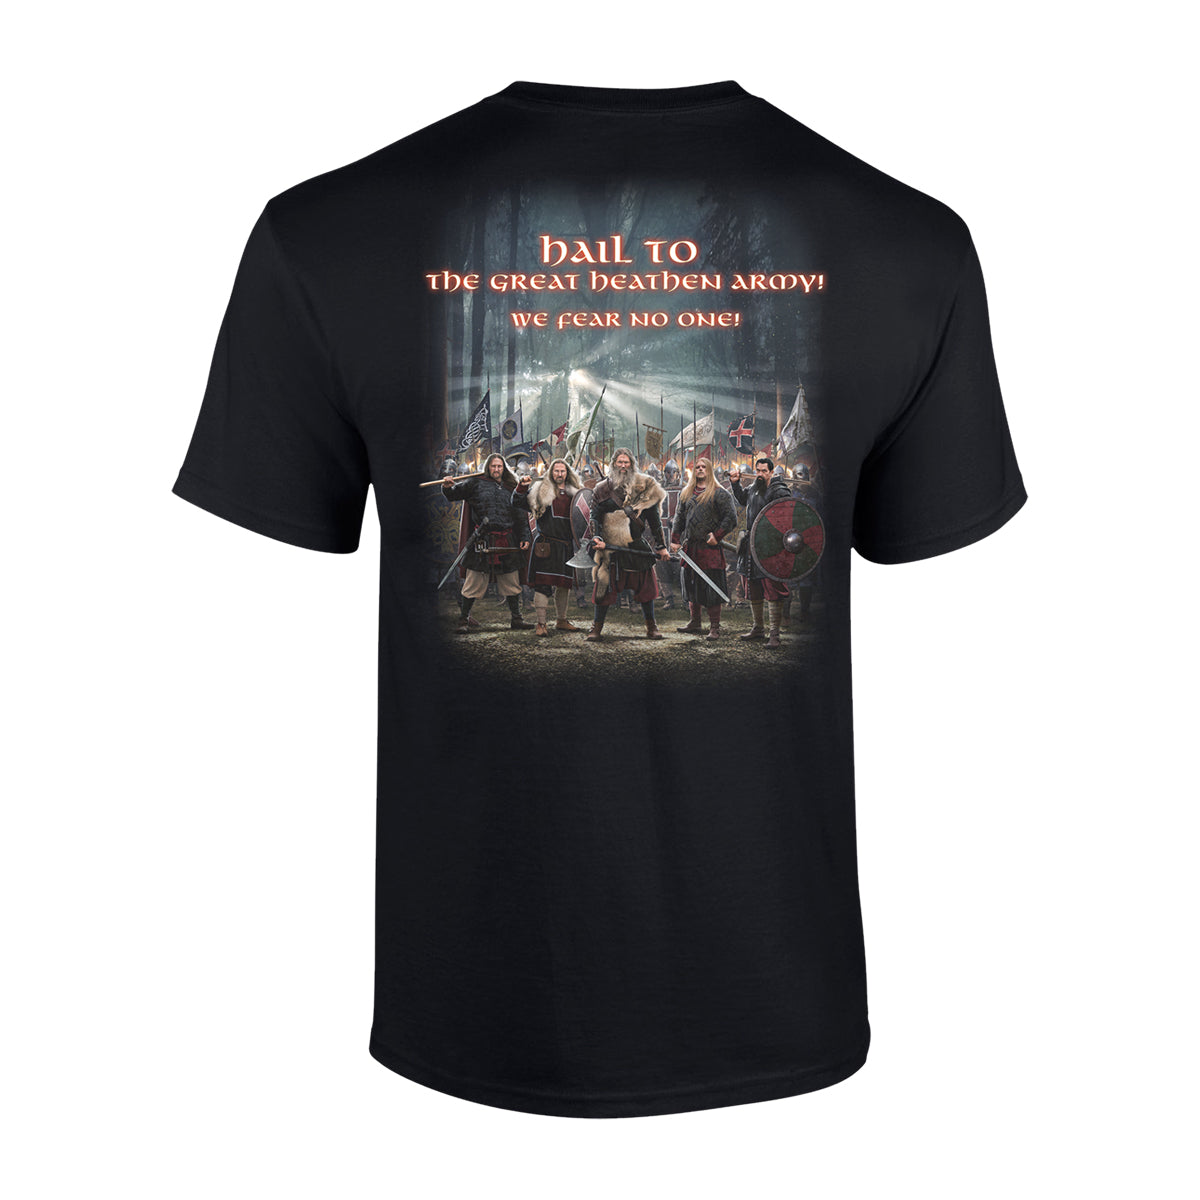 The Great Heathen Army Album Cover T-Shirt